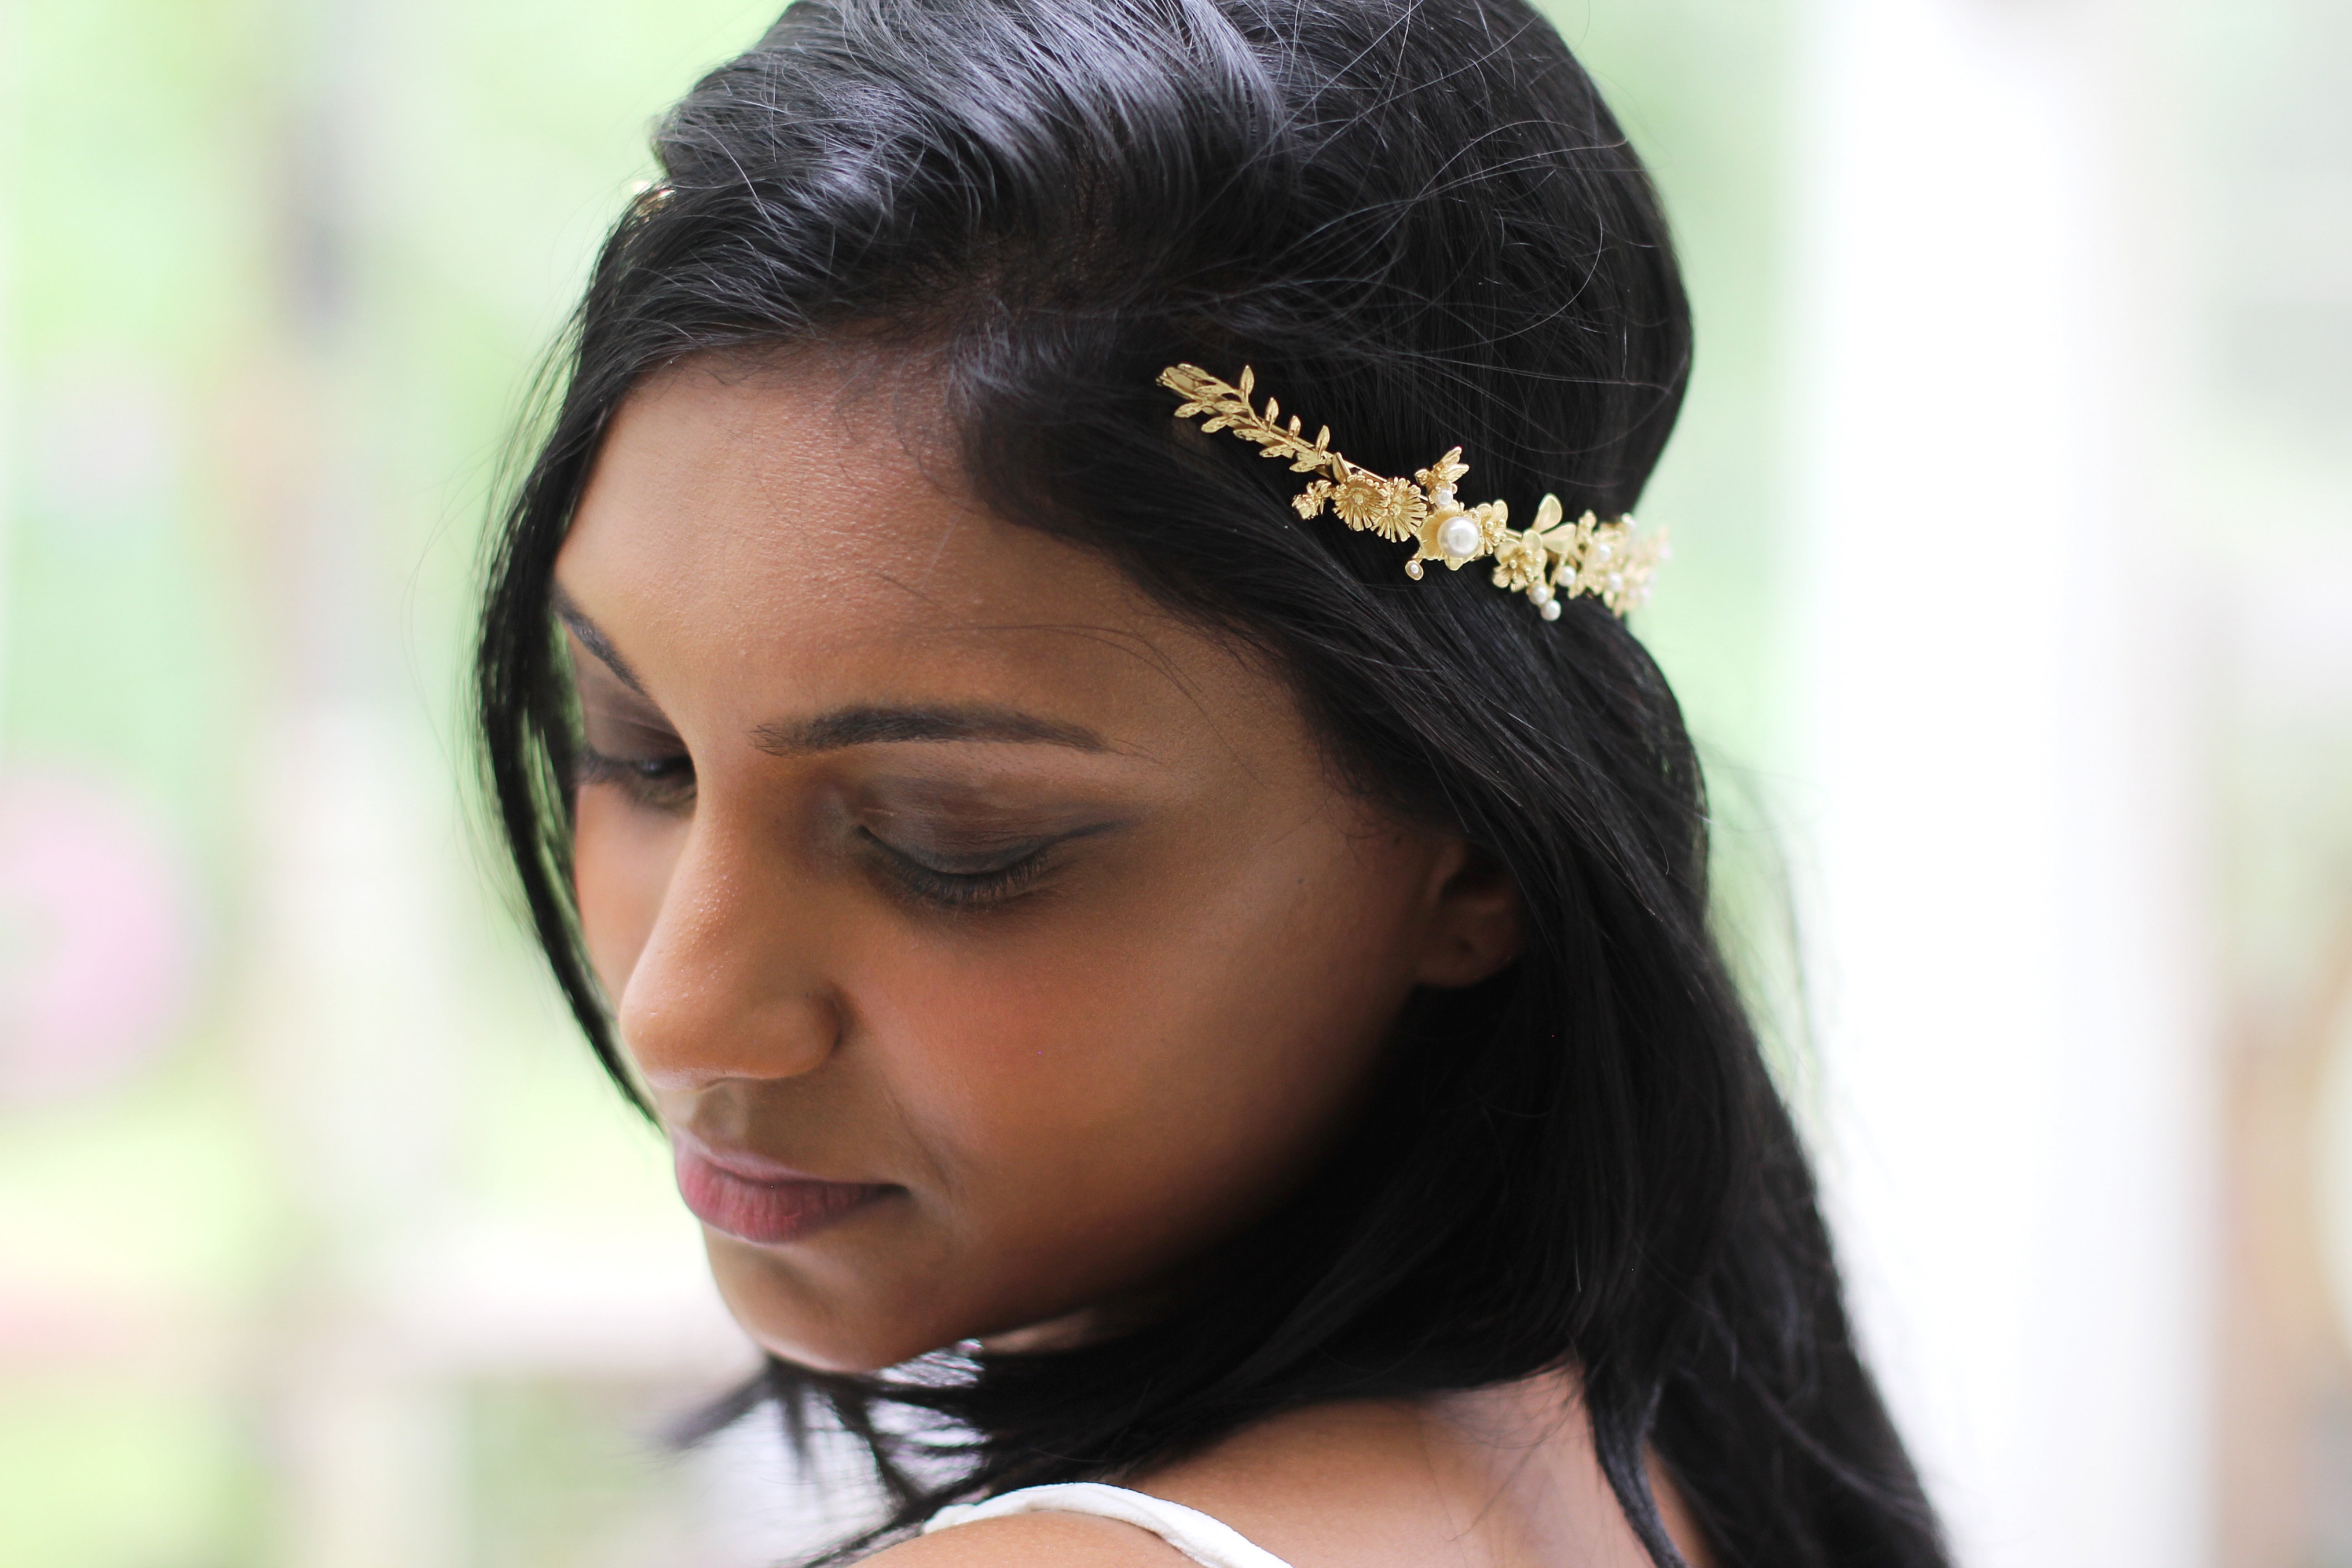 Full Whimsical Meadows Floral Goddess Crown